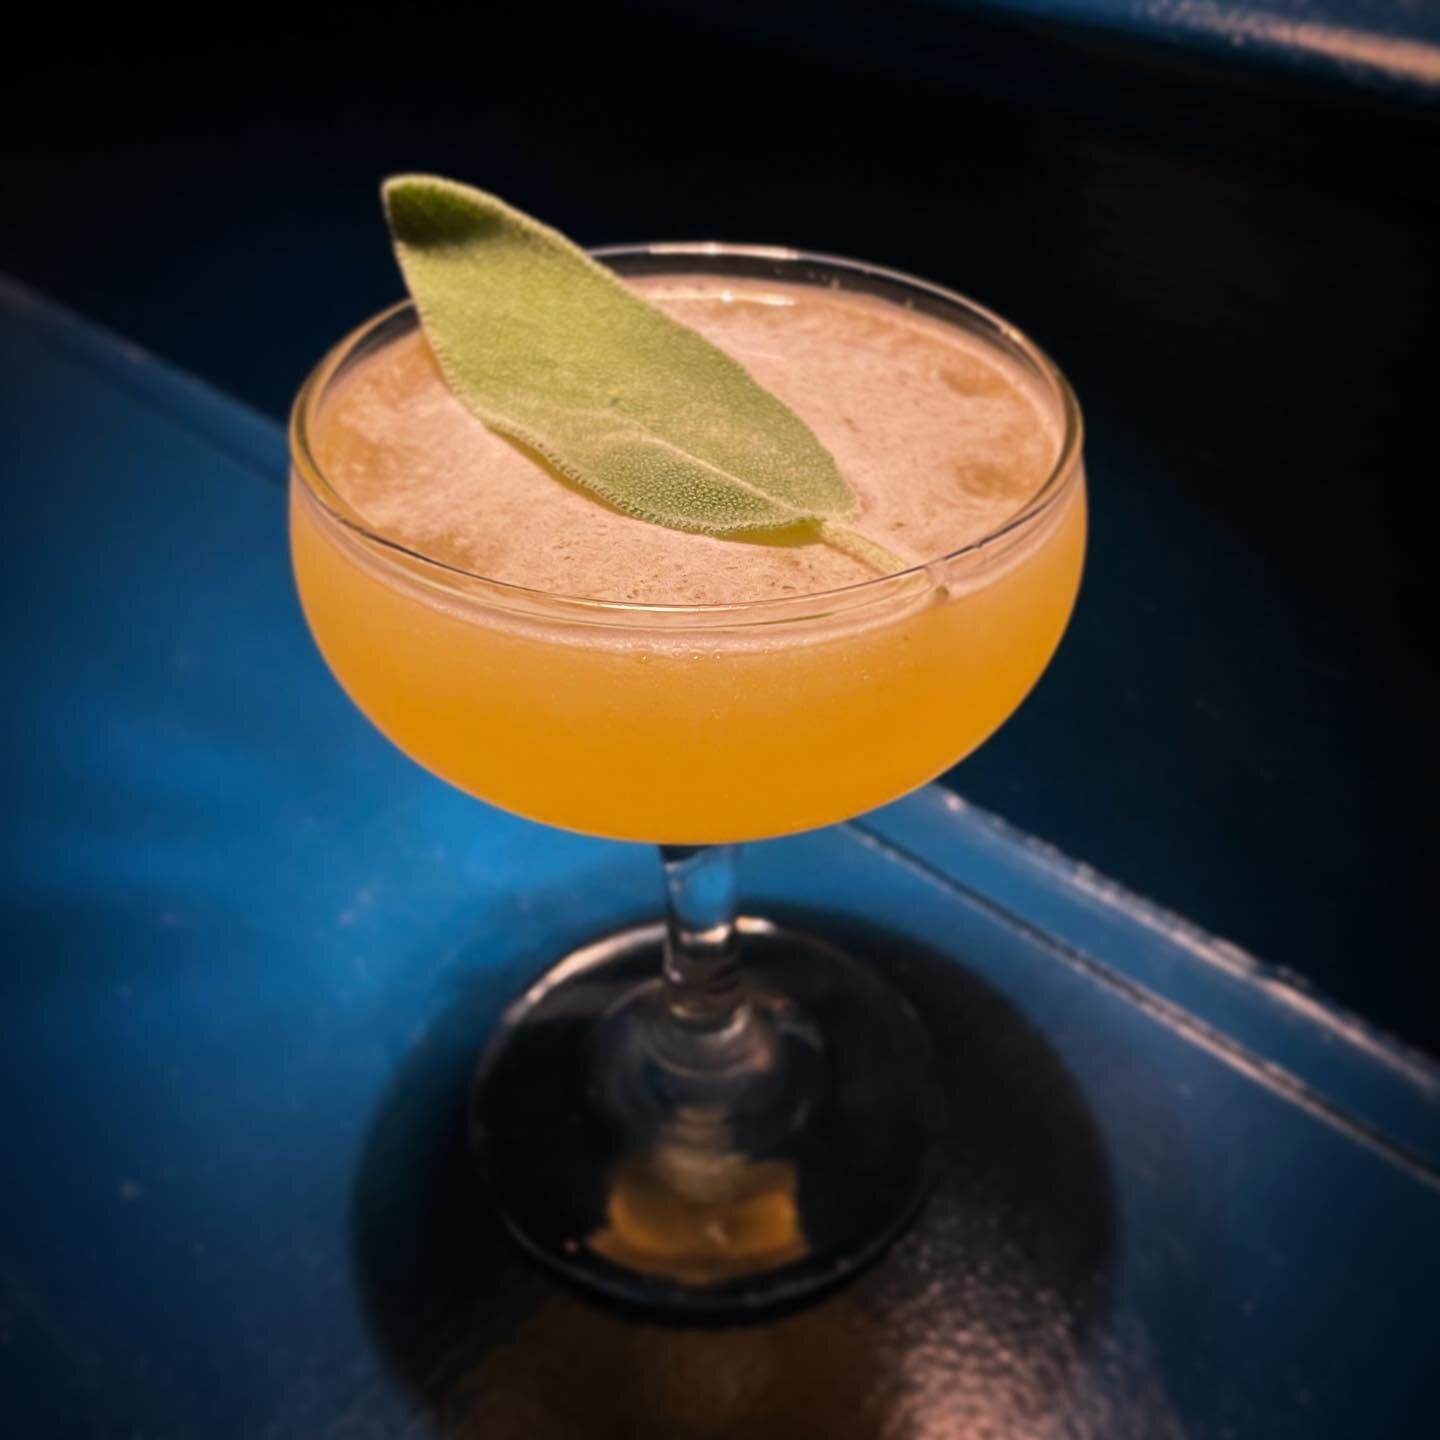 Check out our current drink special: The Changeling! This herbaceous creation features NL Distillery Co. Aquavit, Yellow Chartreuse, and Irish Mist spirits; with muddled sage, cracked pepper, lemon, and honey to balance it out and create a blend of h